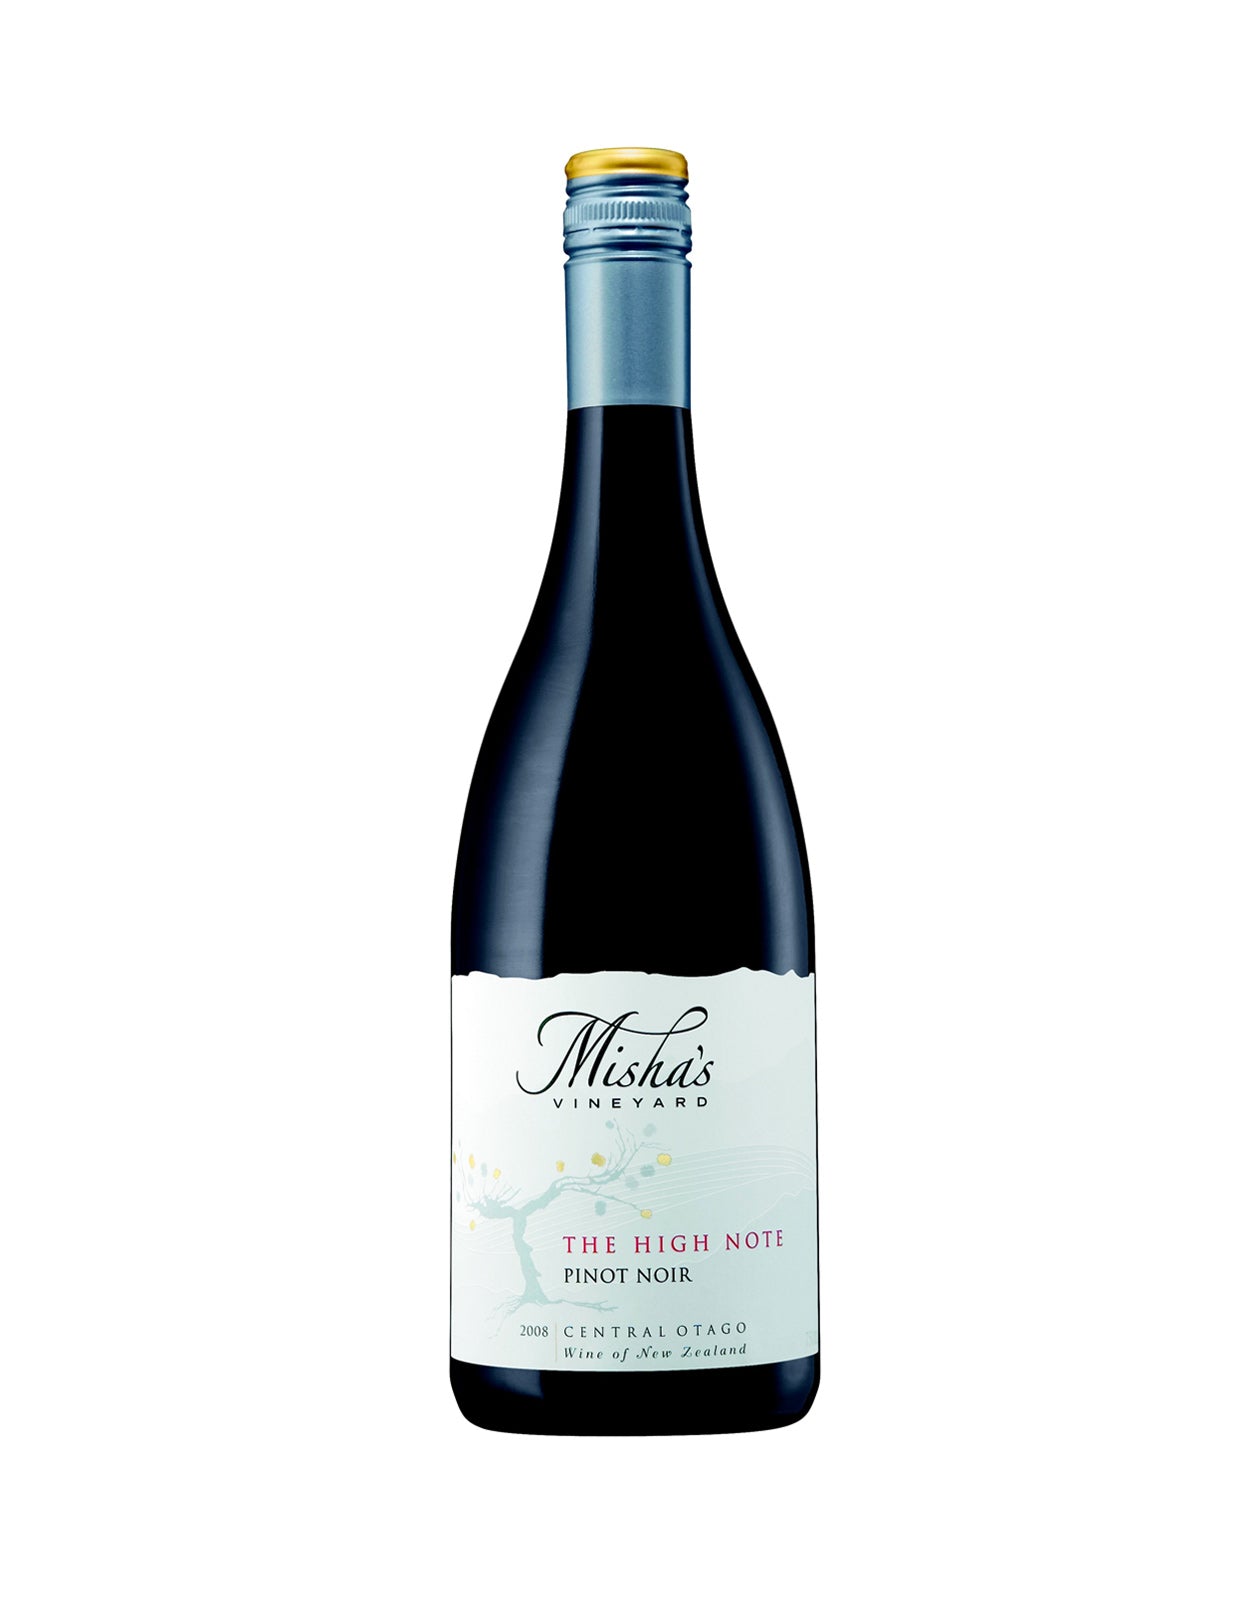 Misha's Pinot Noir The High Note